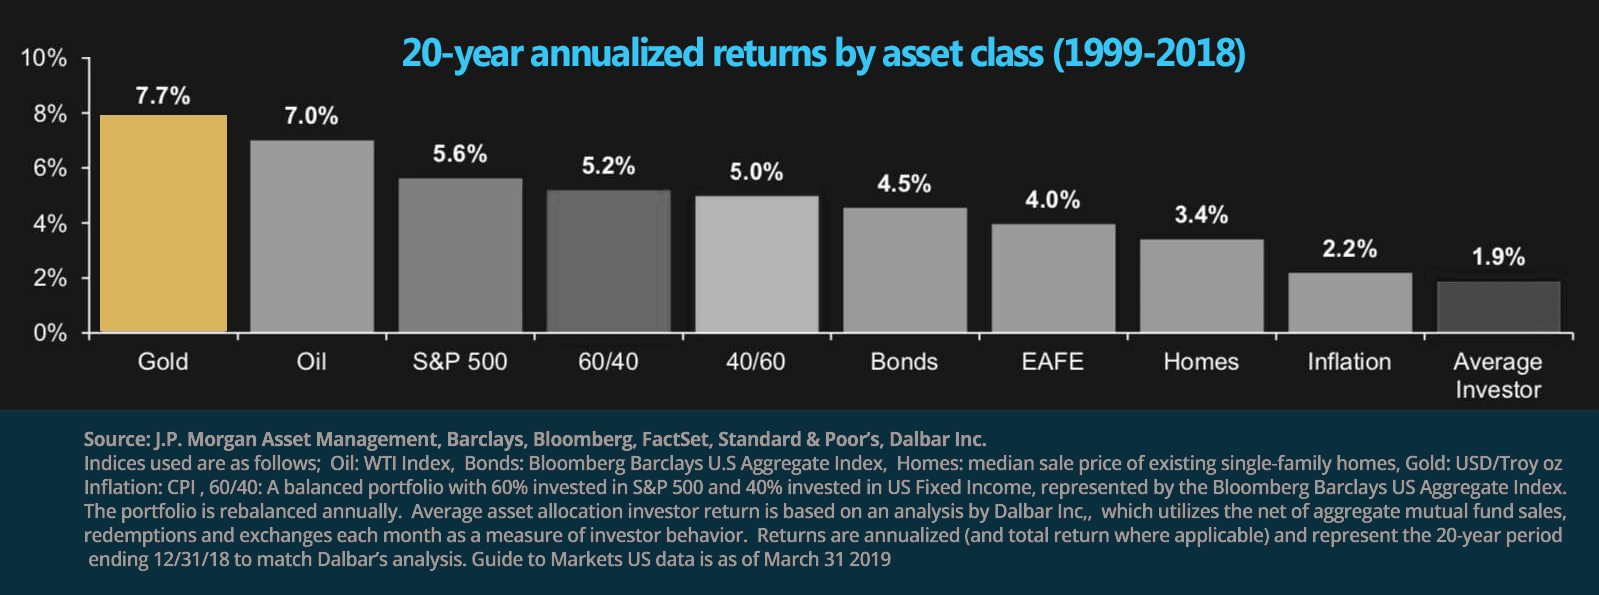 Asset Classes Compared